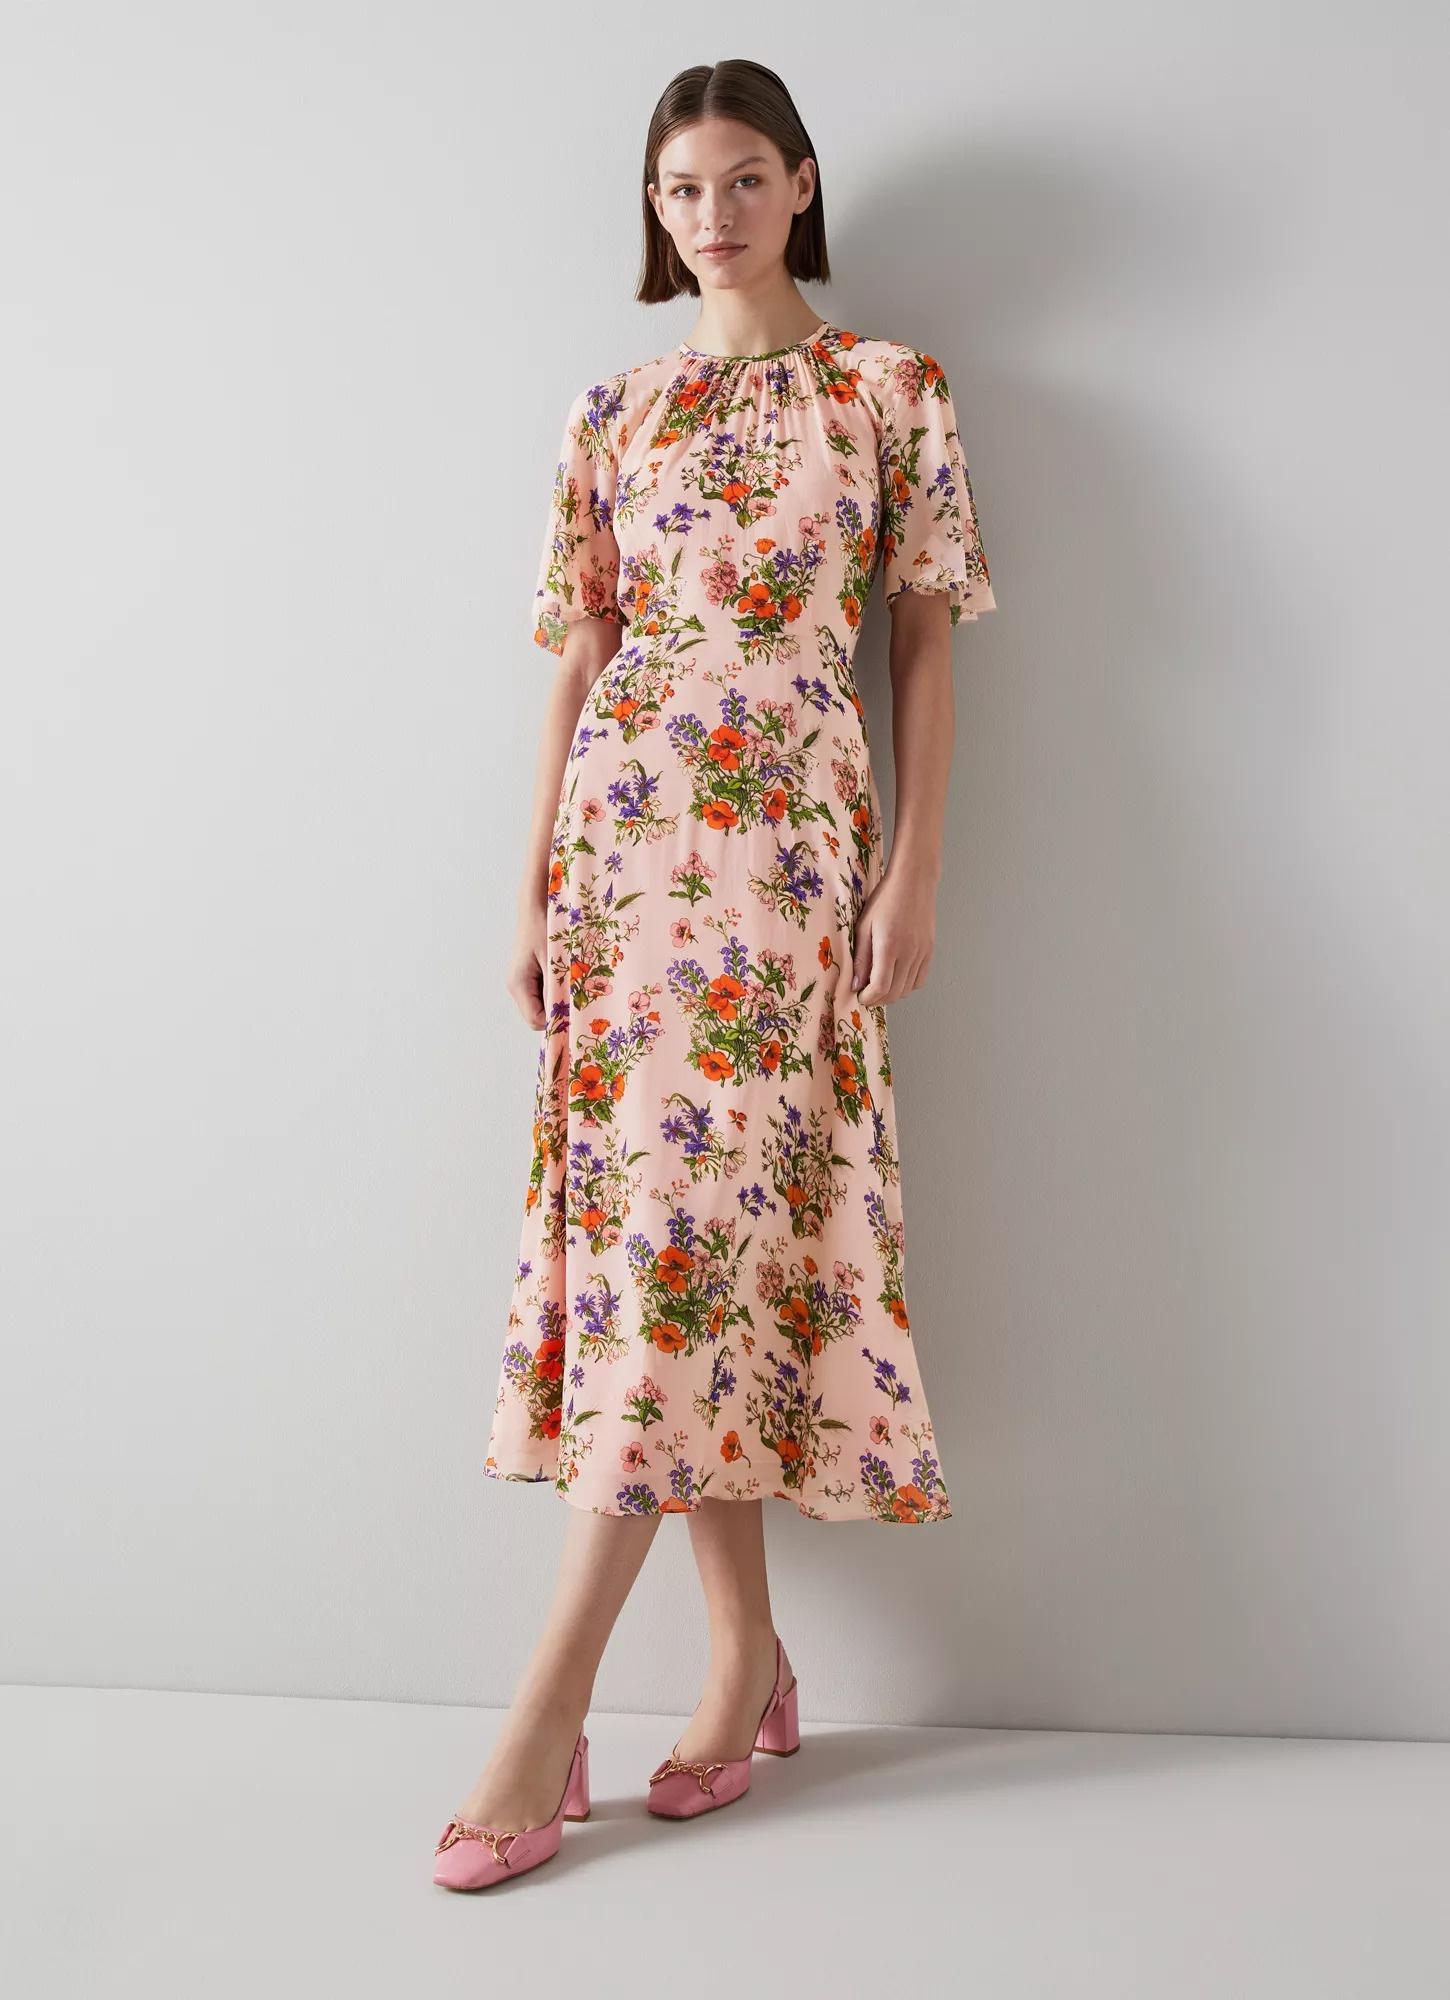 Spring Wedding Guest Dresses: 26 of the Prettiest Picks - hitched.co.uk ...